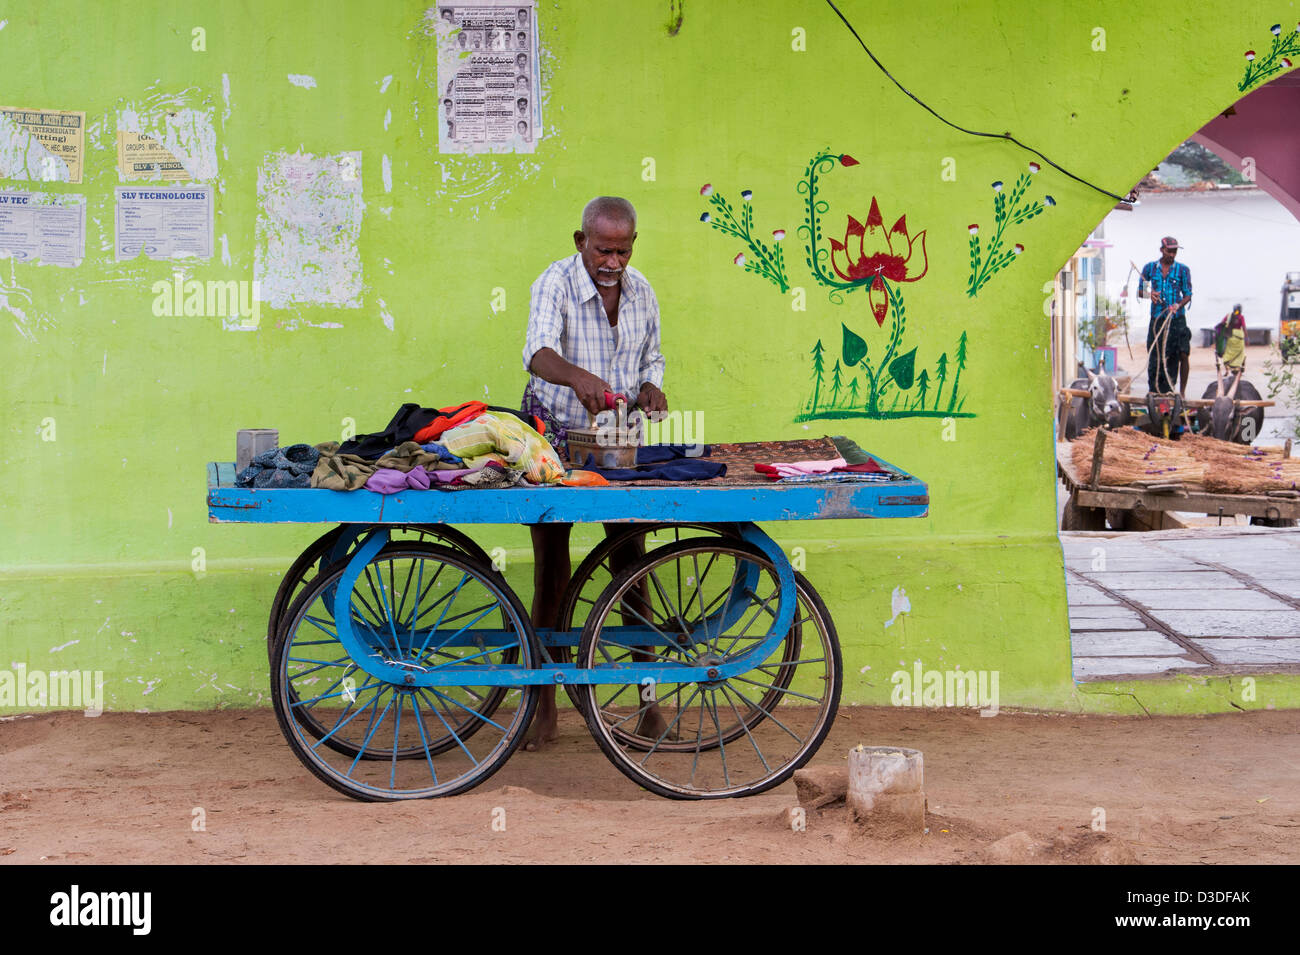 Traditional Indian street laundry man (dhobi) ironing washed clothes on a cart. Andhra Pradesh, India Stock Photo